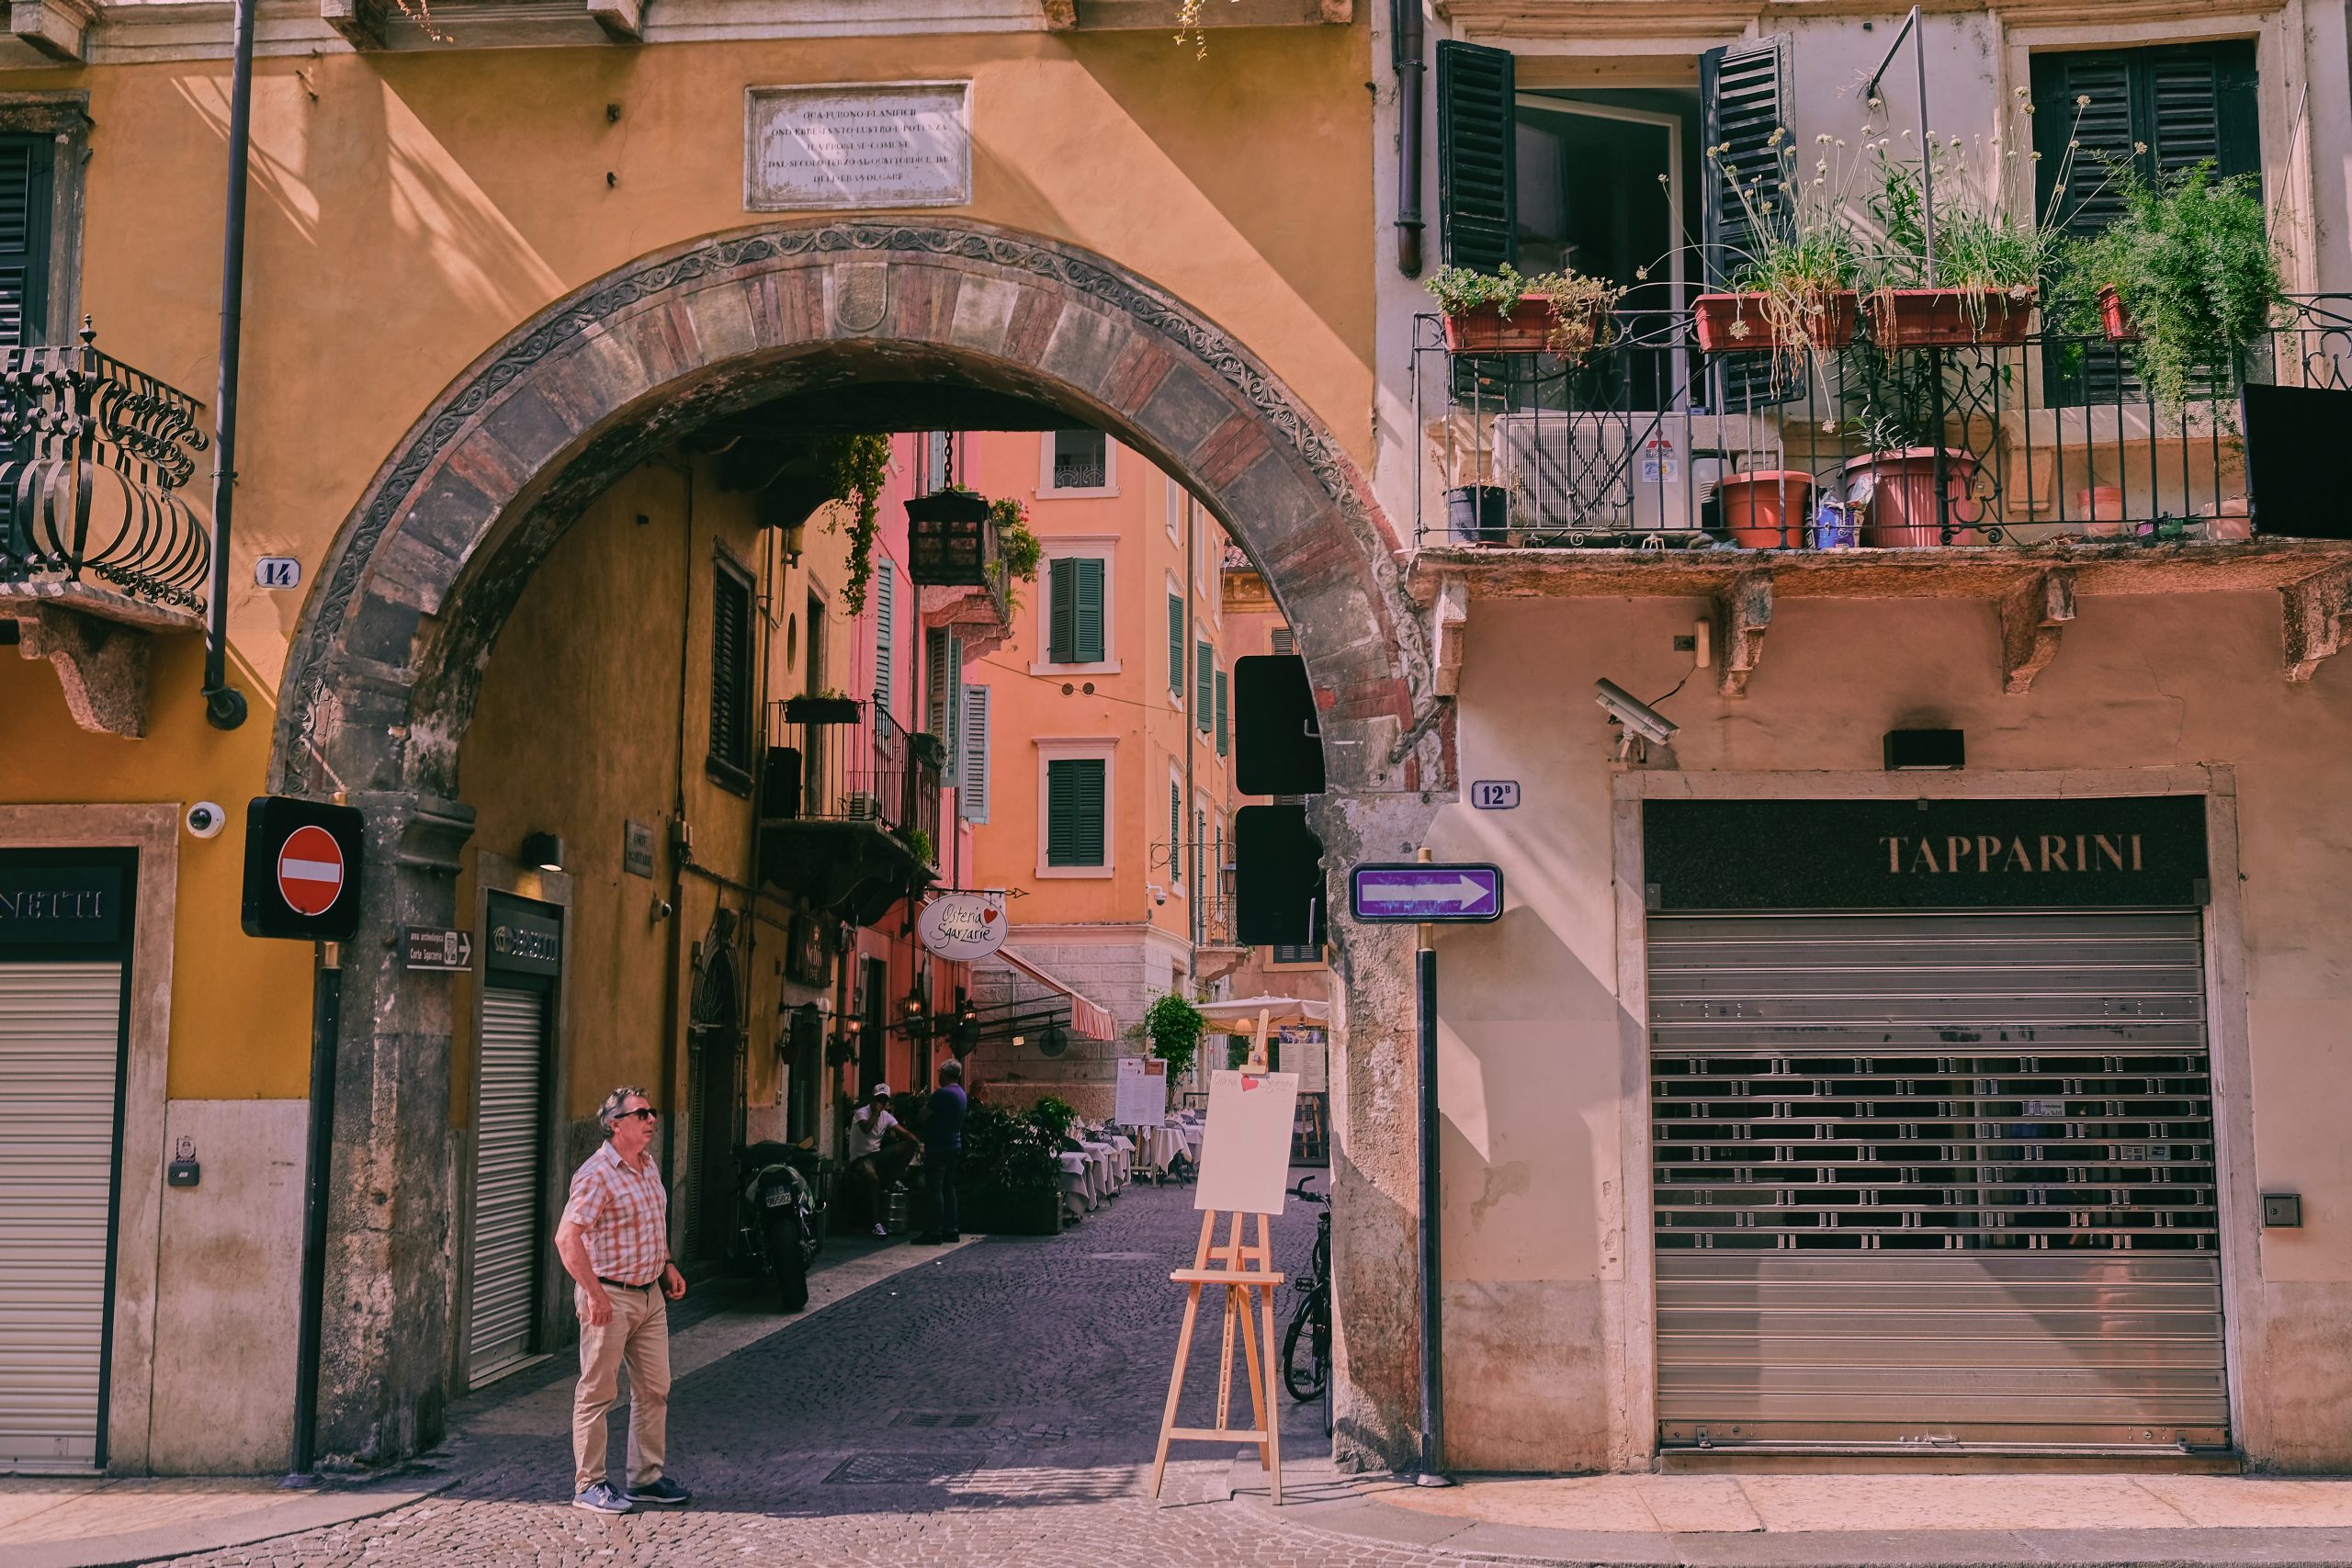 Verona makes for a great day trip from milan